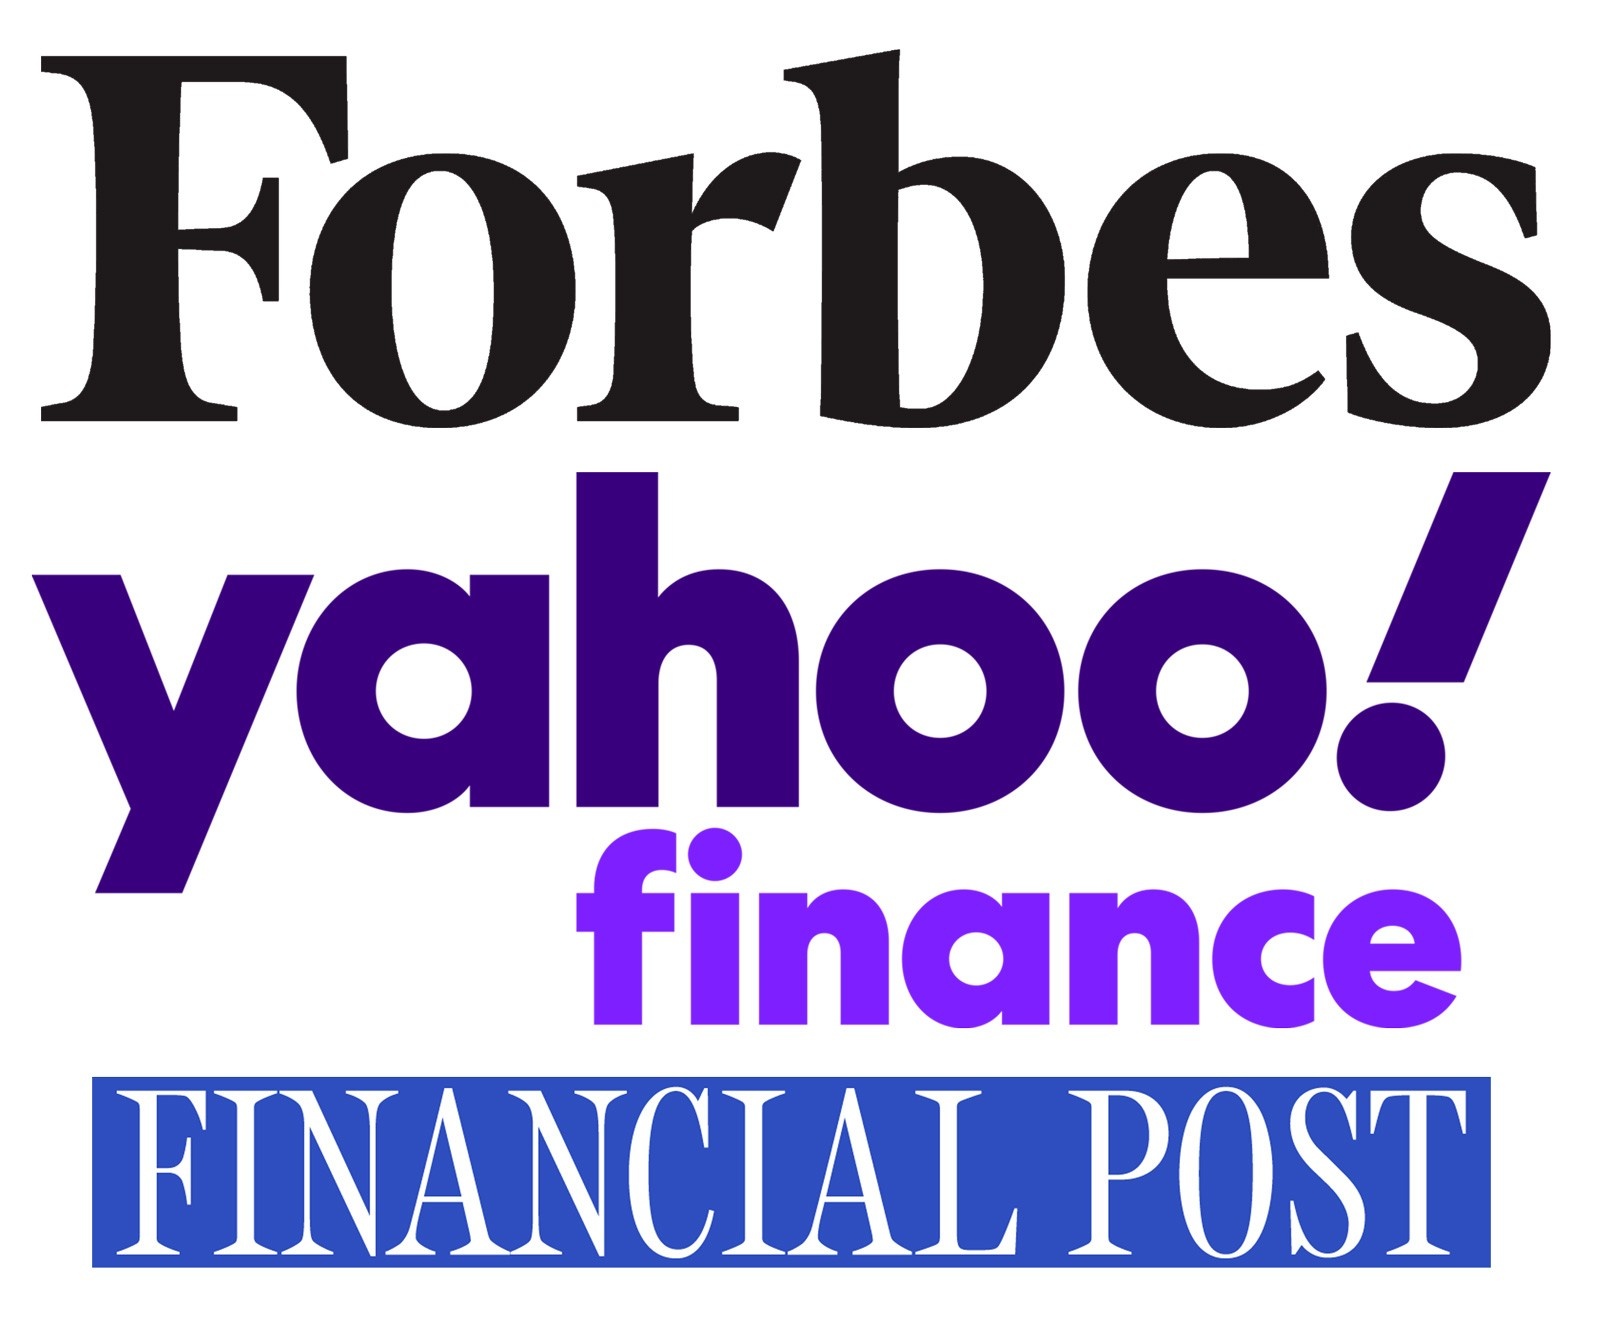 Forbes, Yahoo and Financial Post logos. 